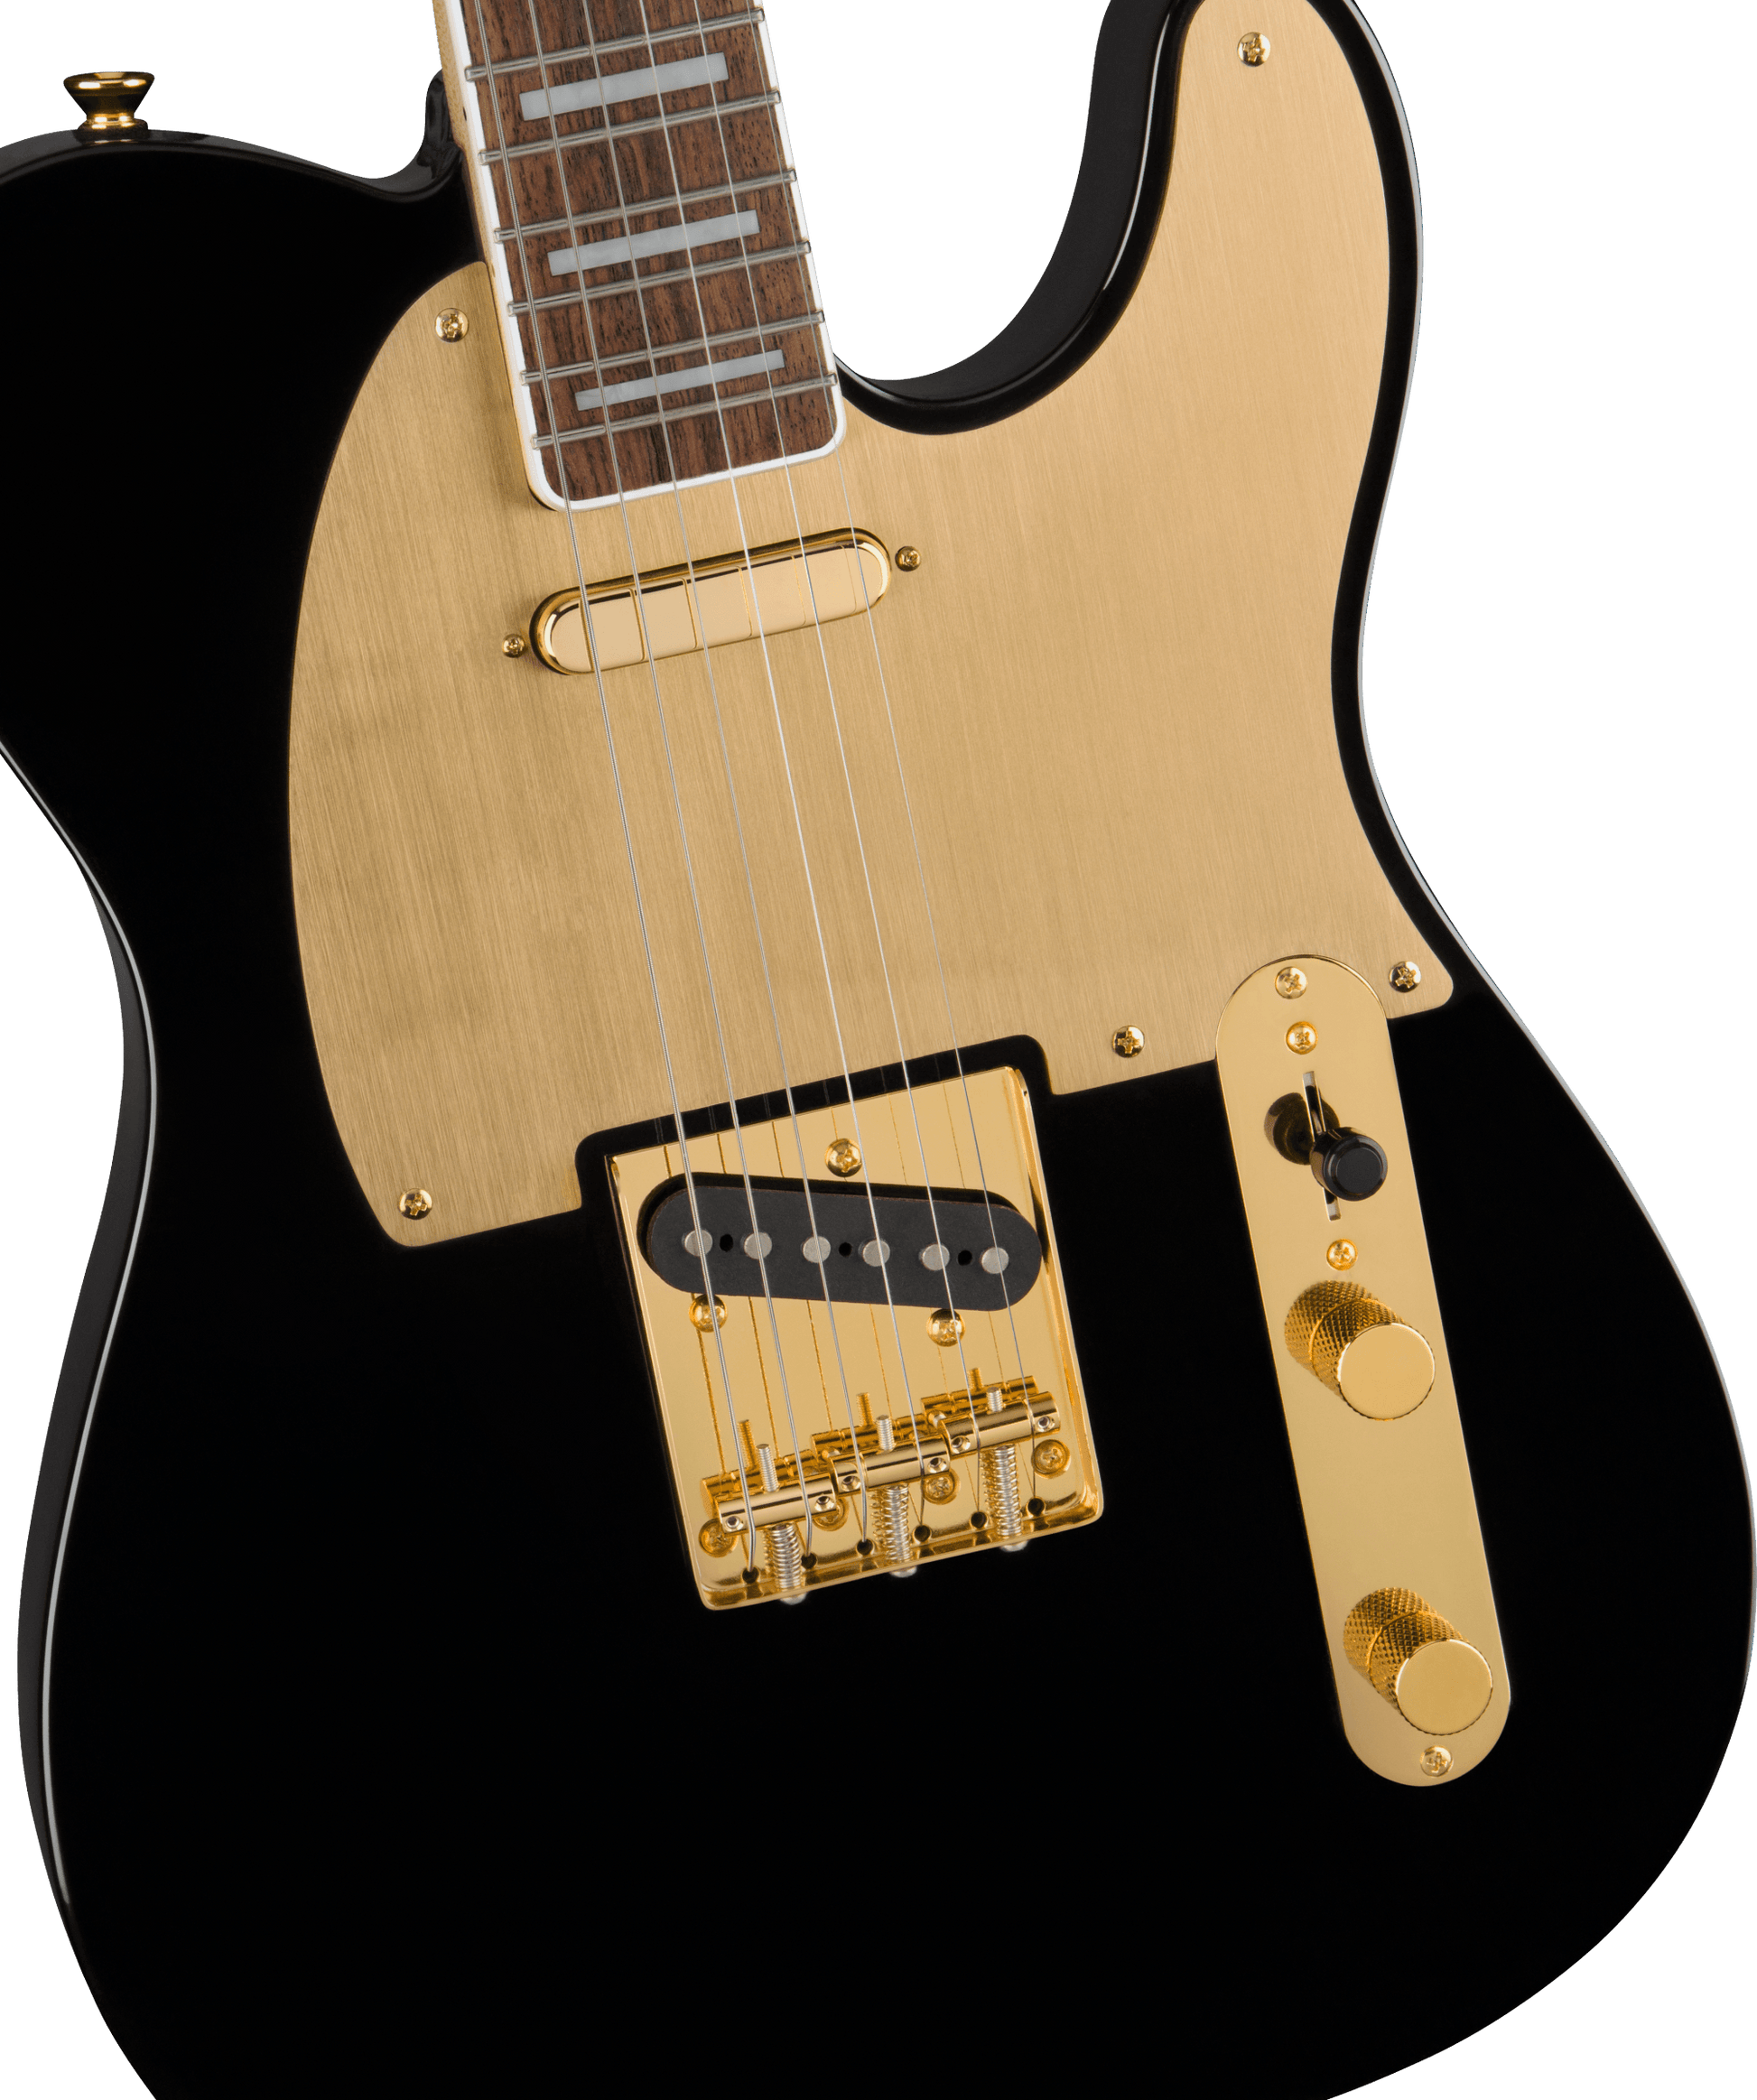 Squier 40th Anniversary Telecaster Electric Guitar - Black - Joondalup Music Centre